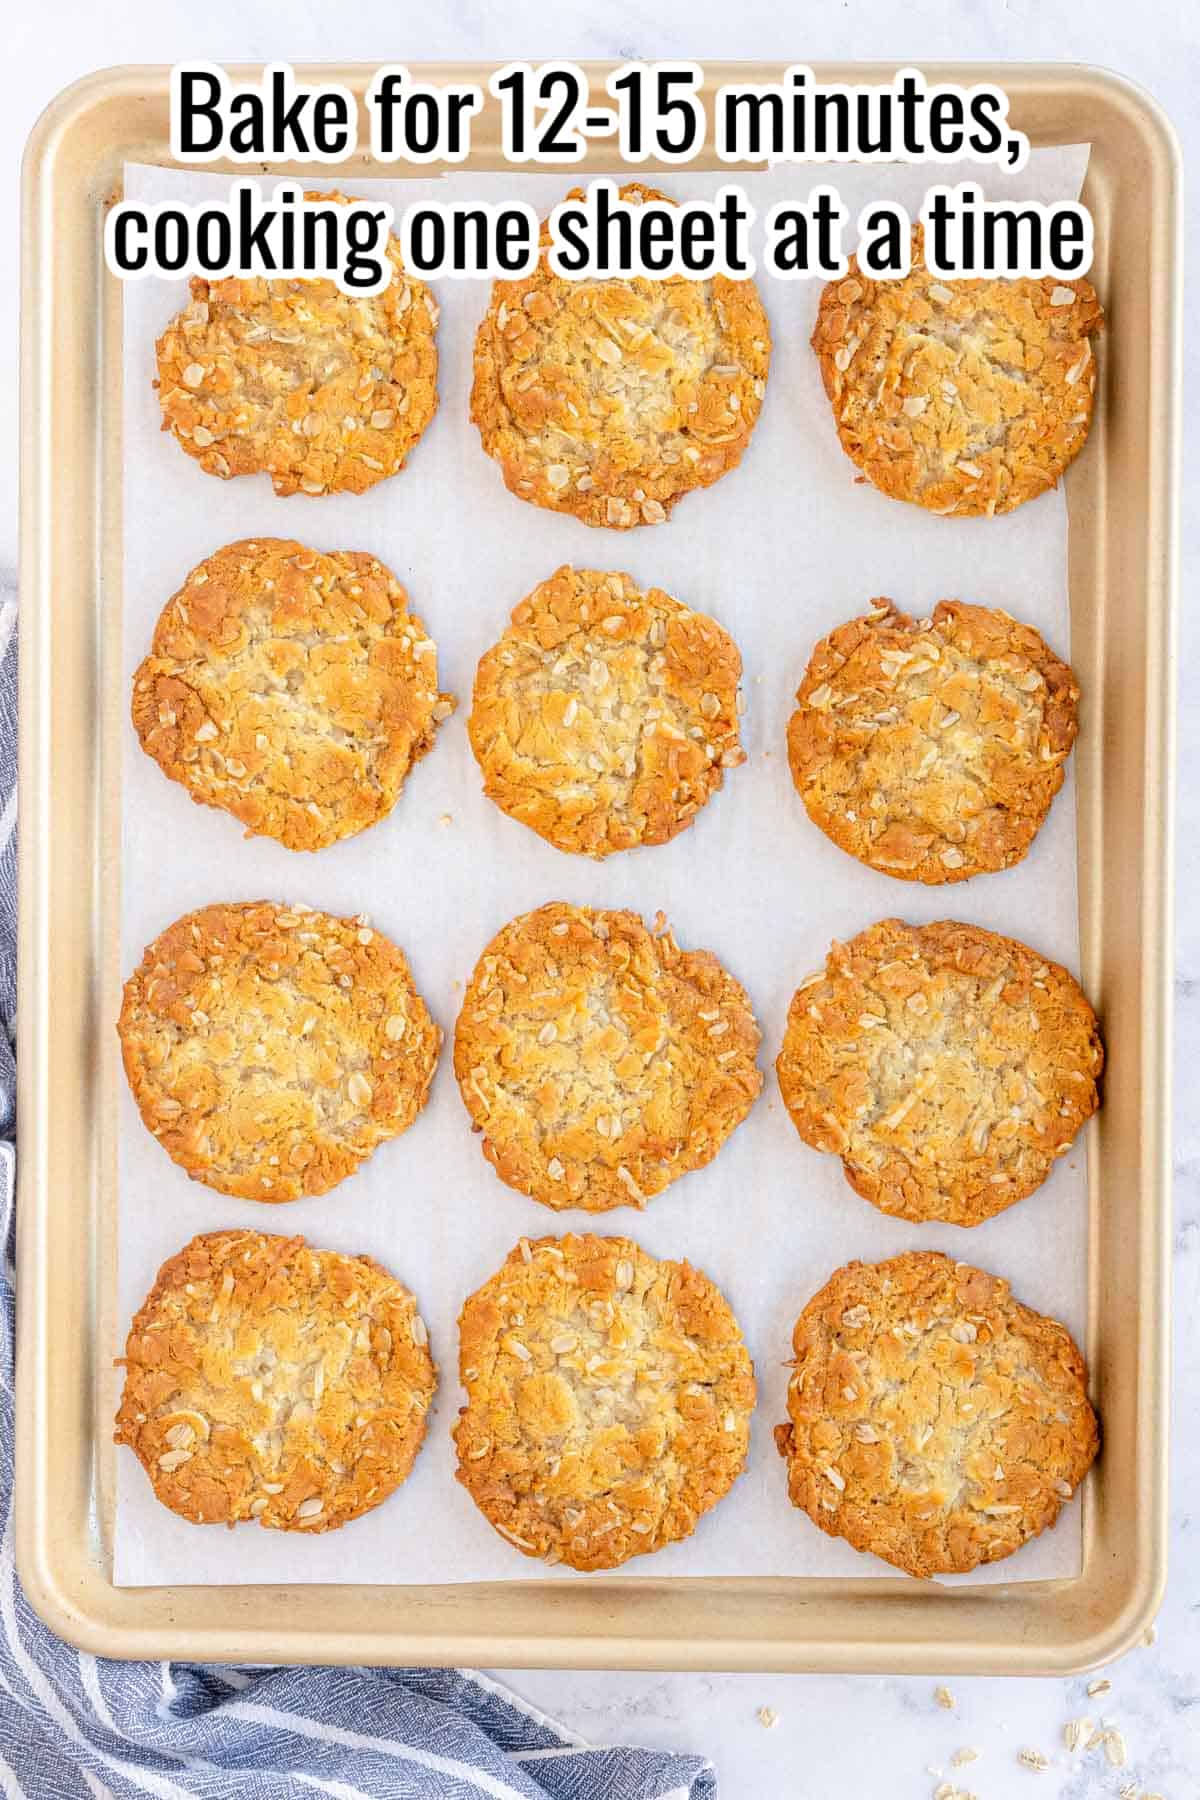 sheet pan of baked cookies with instructions overlaid in text.